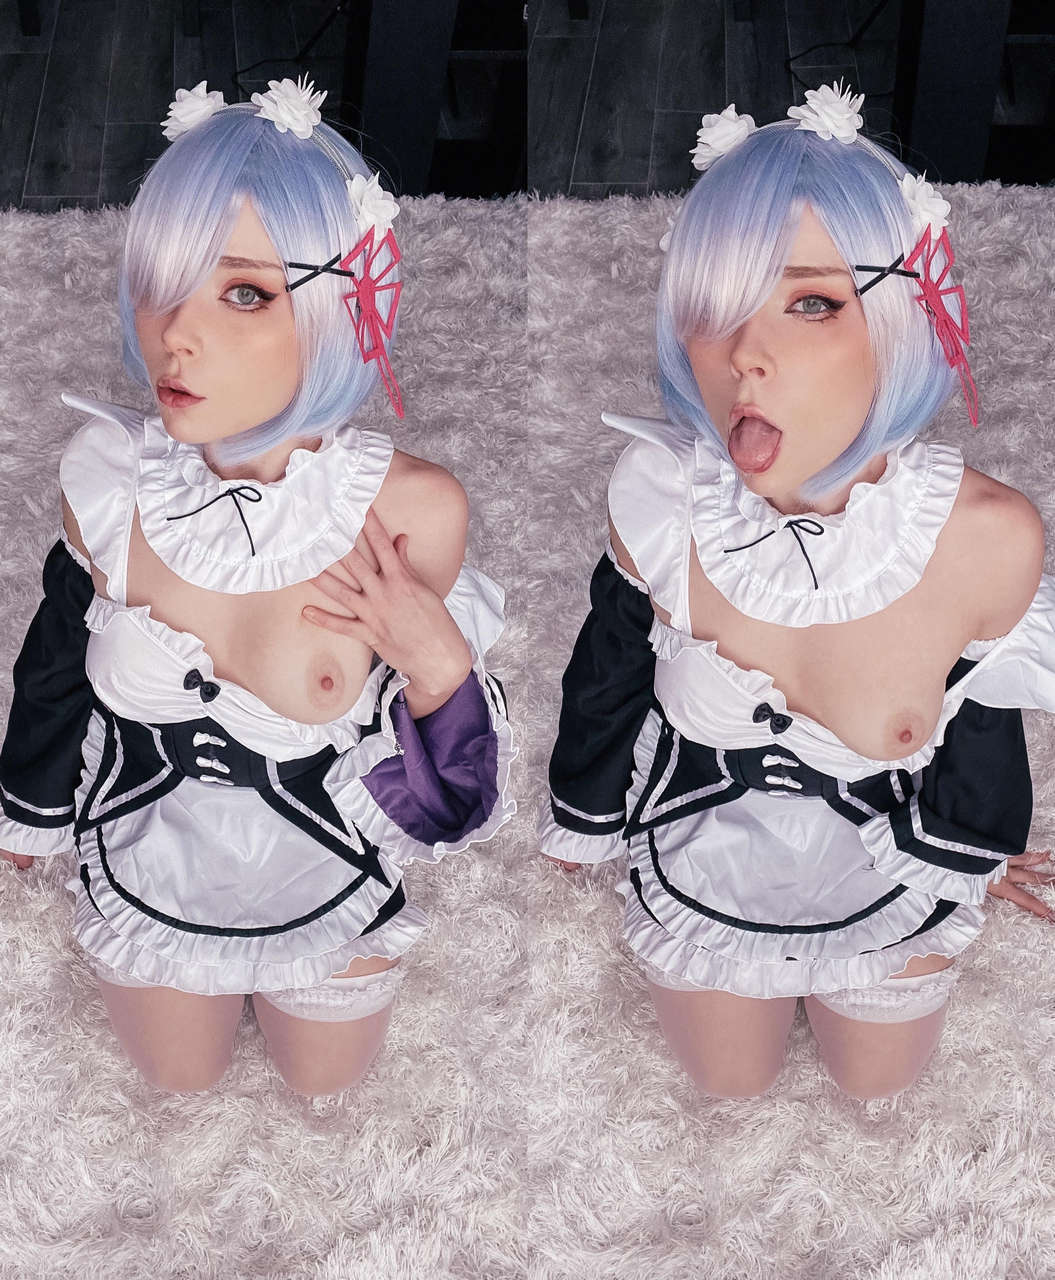 Rem By Sweetiefo